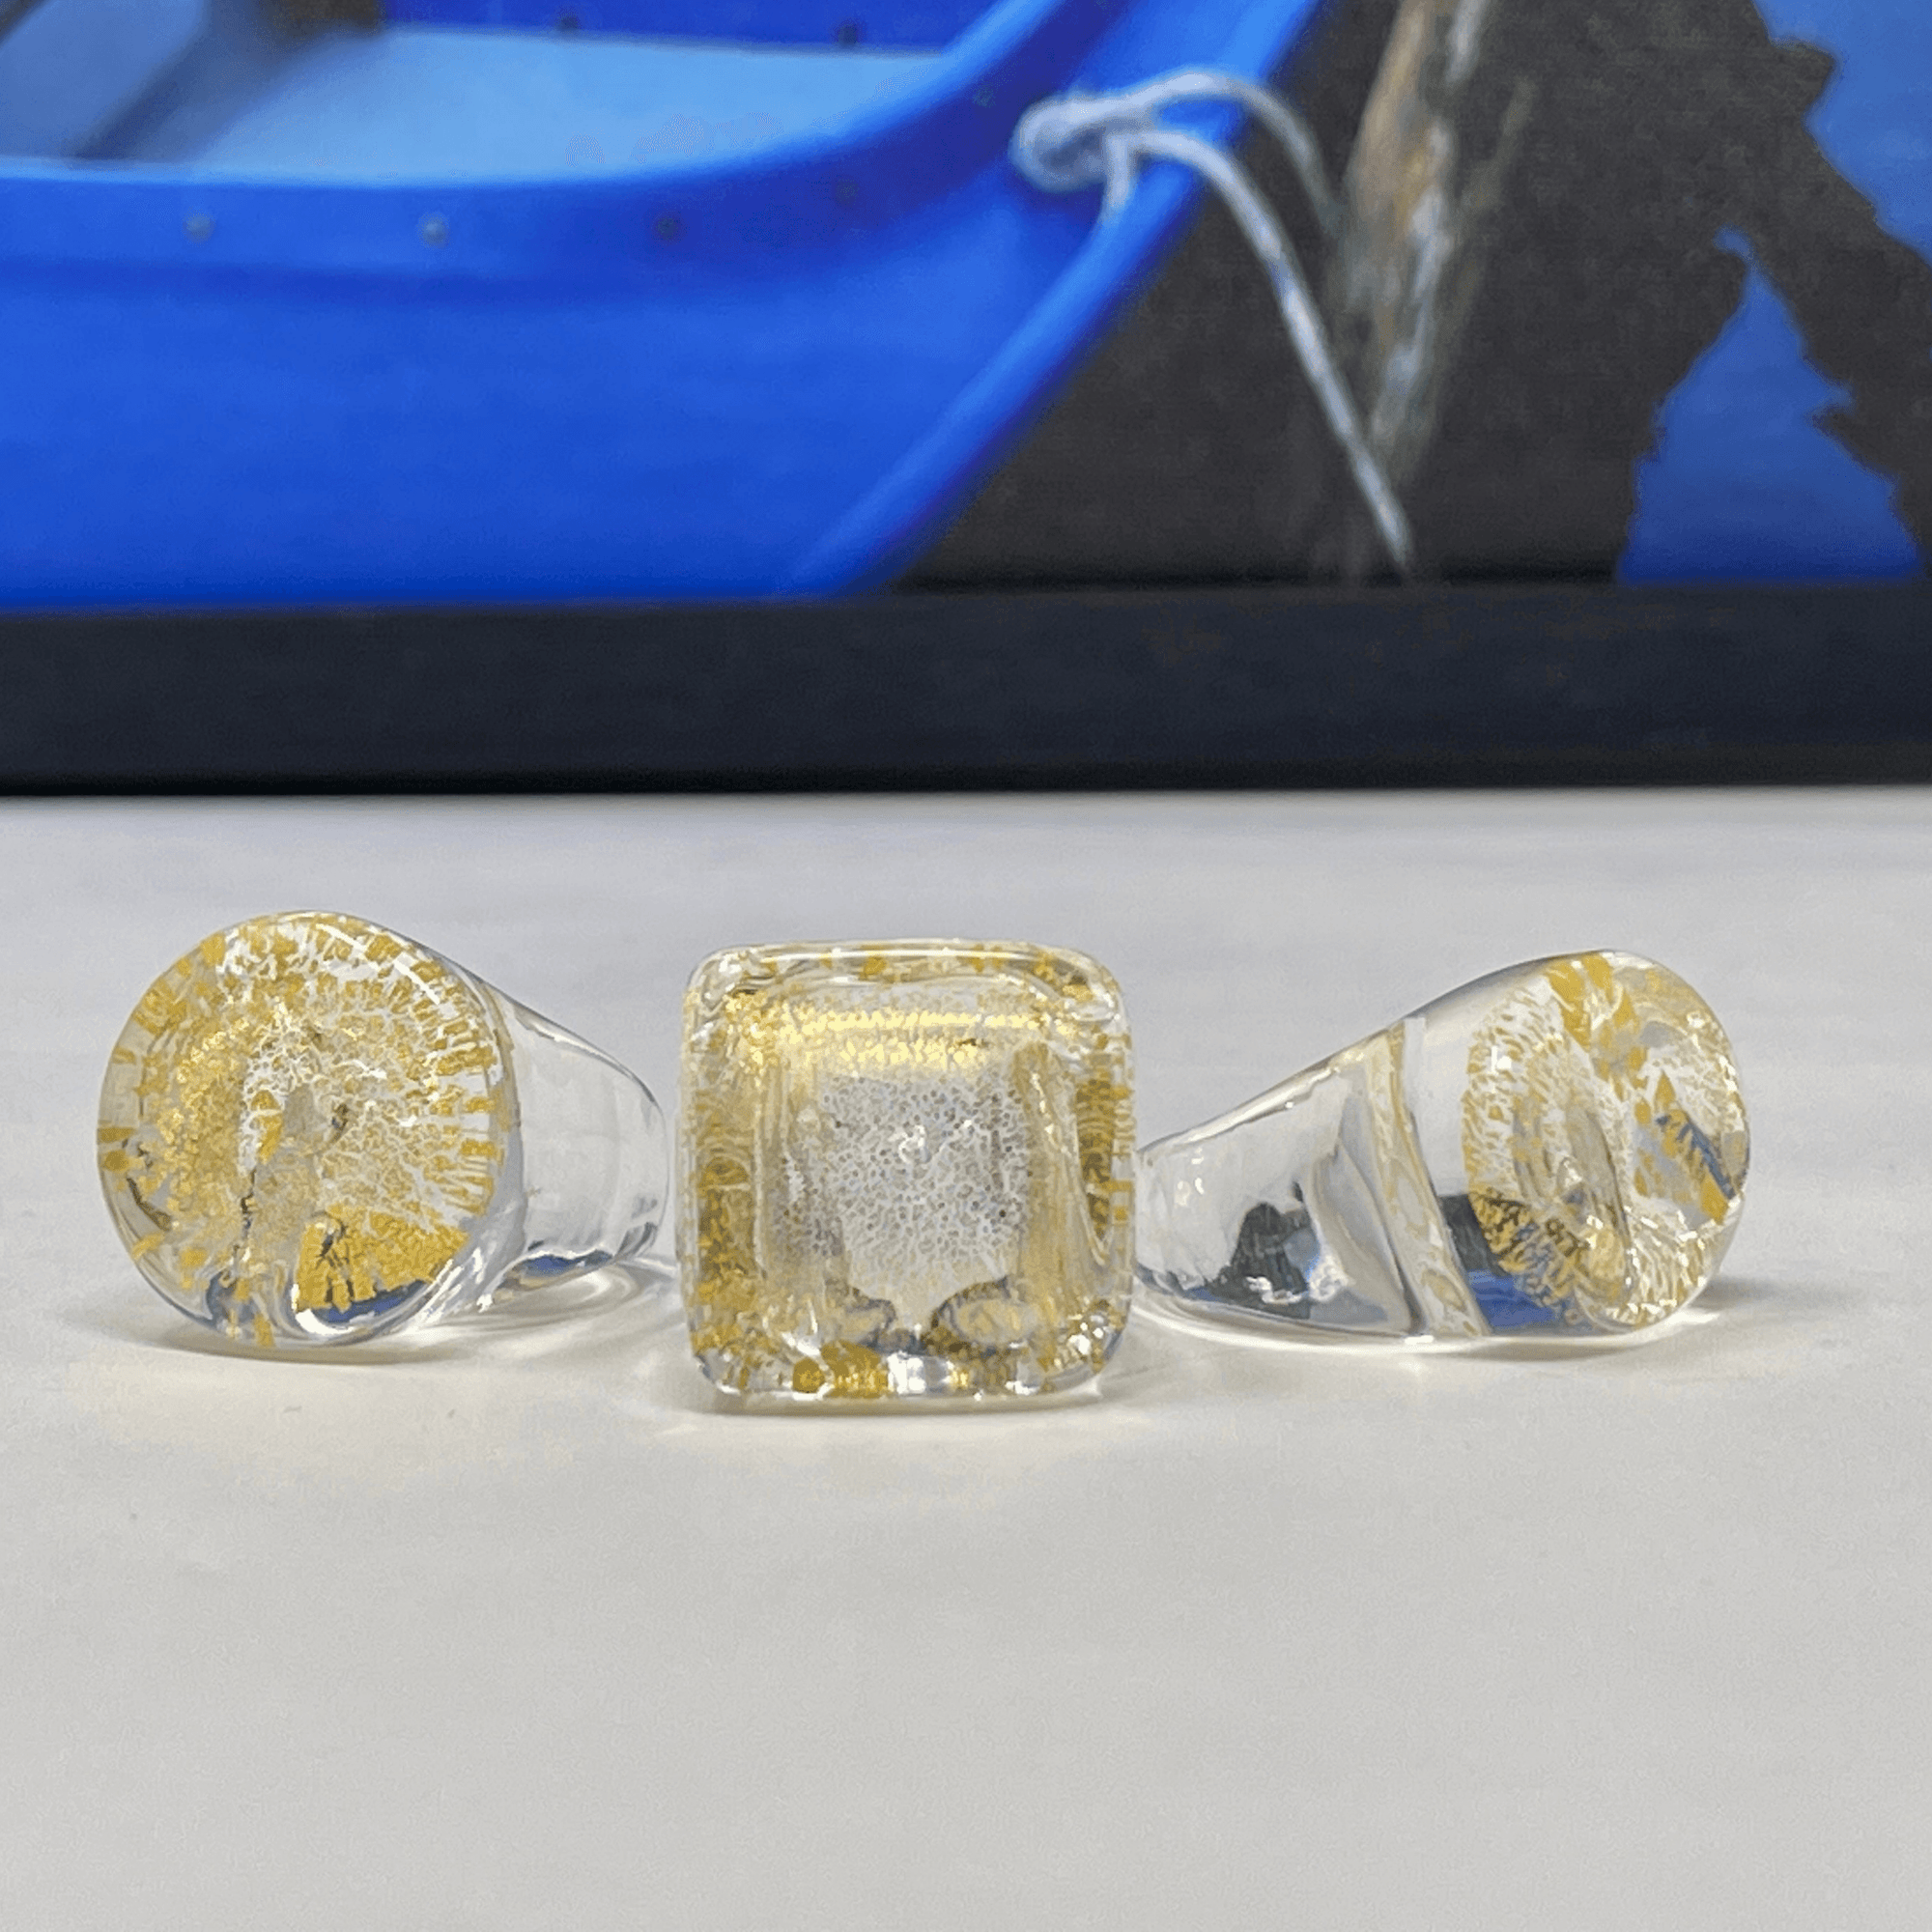 Murano Glass Statement Rings, 24 karat gold foil accent, Oval, Square or Round at MyItalianDecor